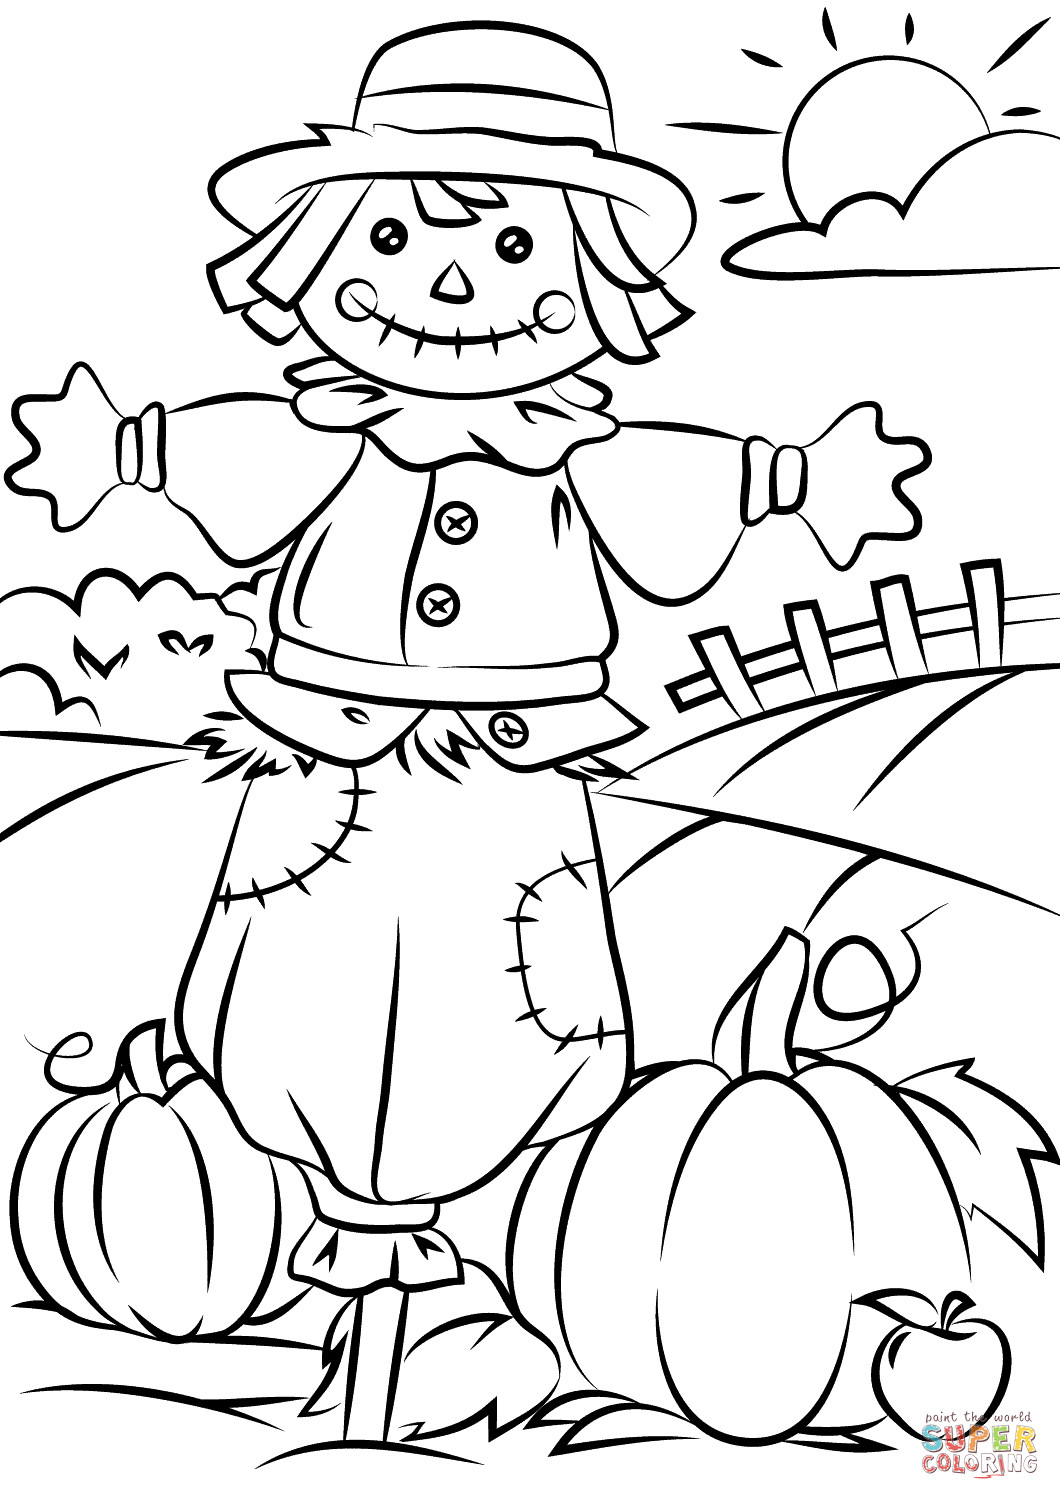 Fall Coloring Sheets Free
 Autumn Scene with Scarecrow coloring page